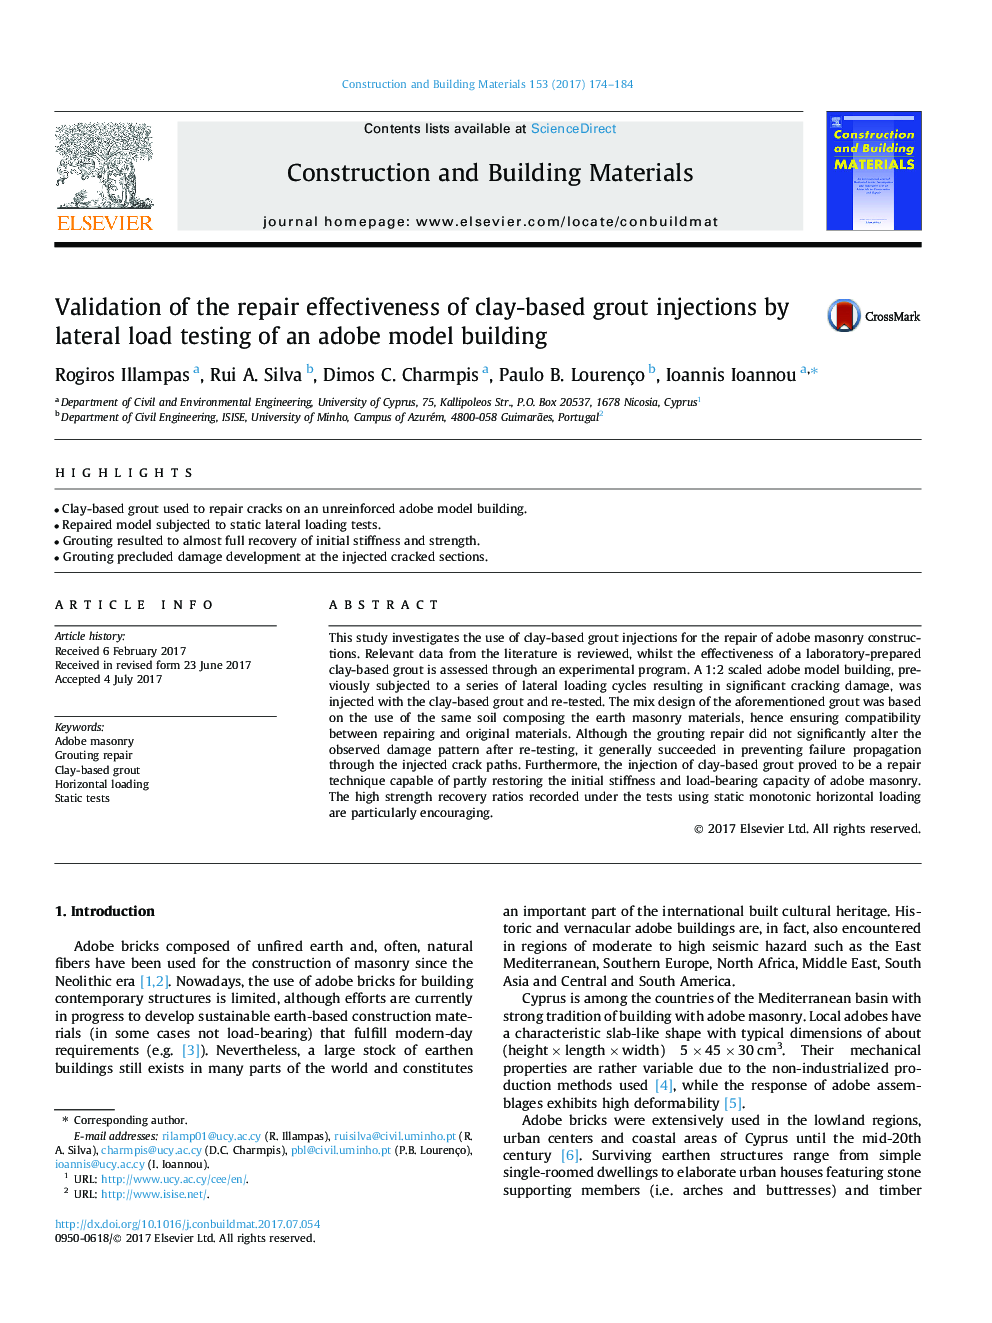 Validation of the repair effectiveness of clay-based grout injections by lateral load testing of an adobe model building